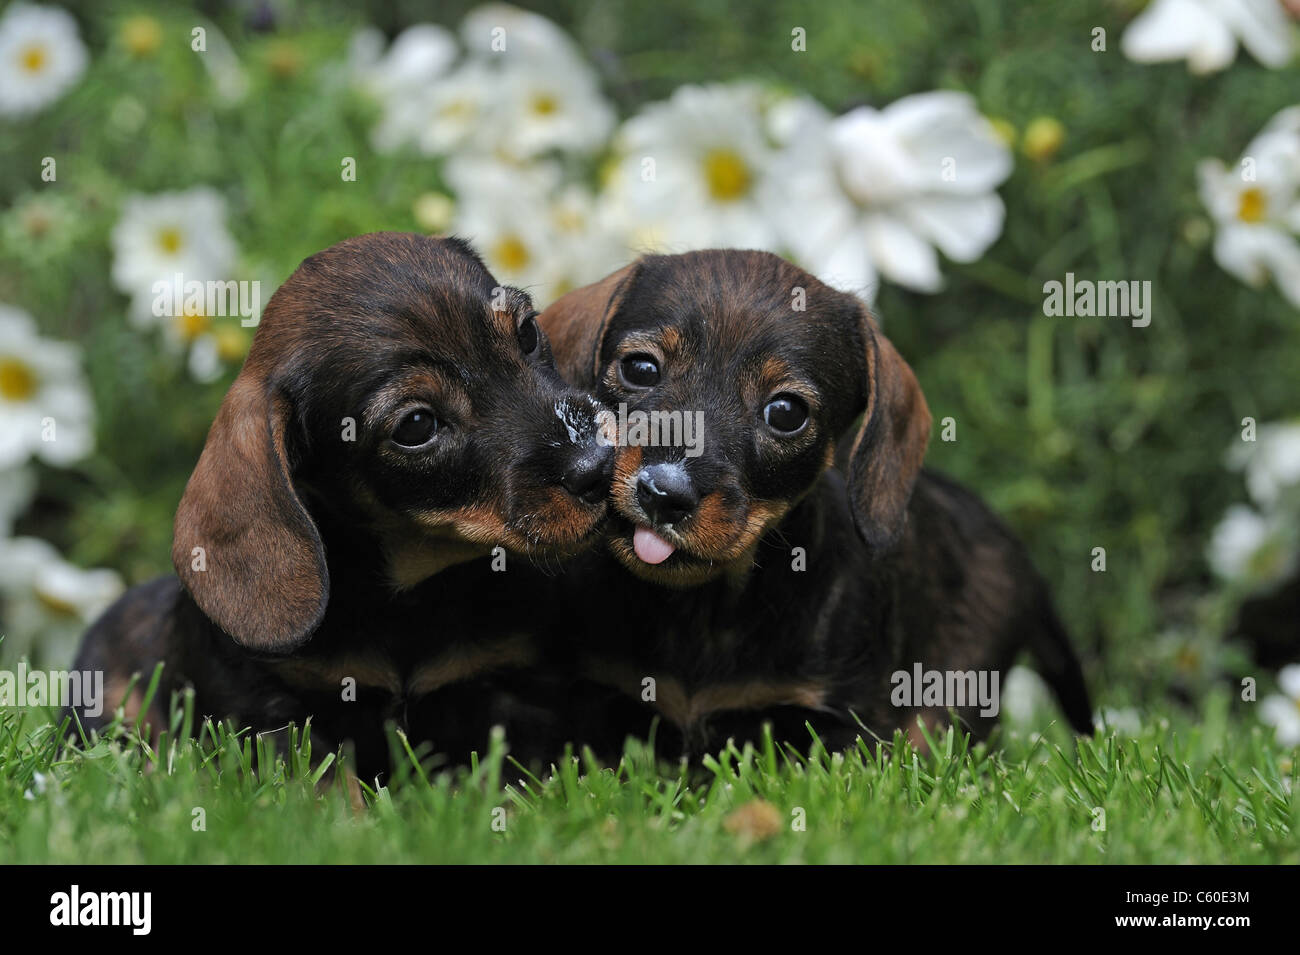 Wire-haired Dachshund. Two puppies sitting on a lawn in a flowering garden while one licks whipped cream from the others nose. Stock Photo